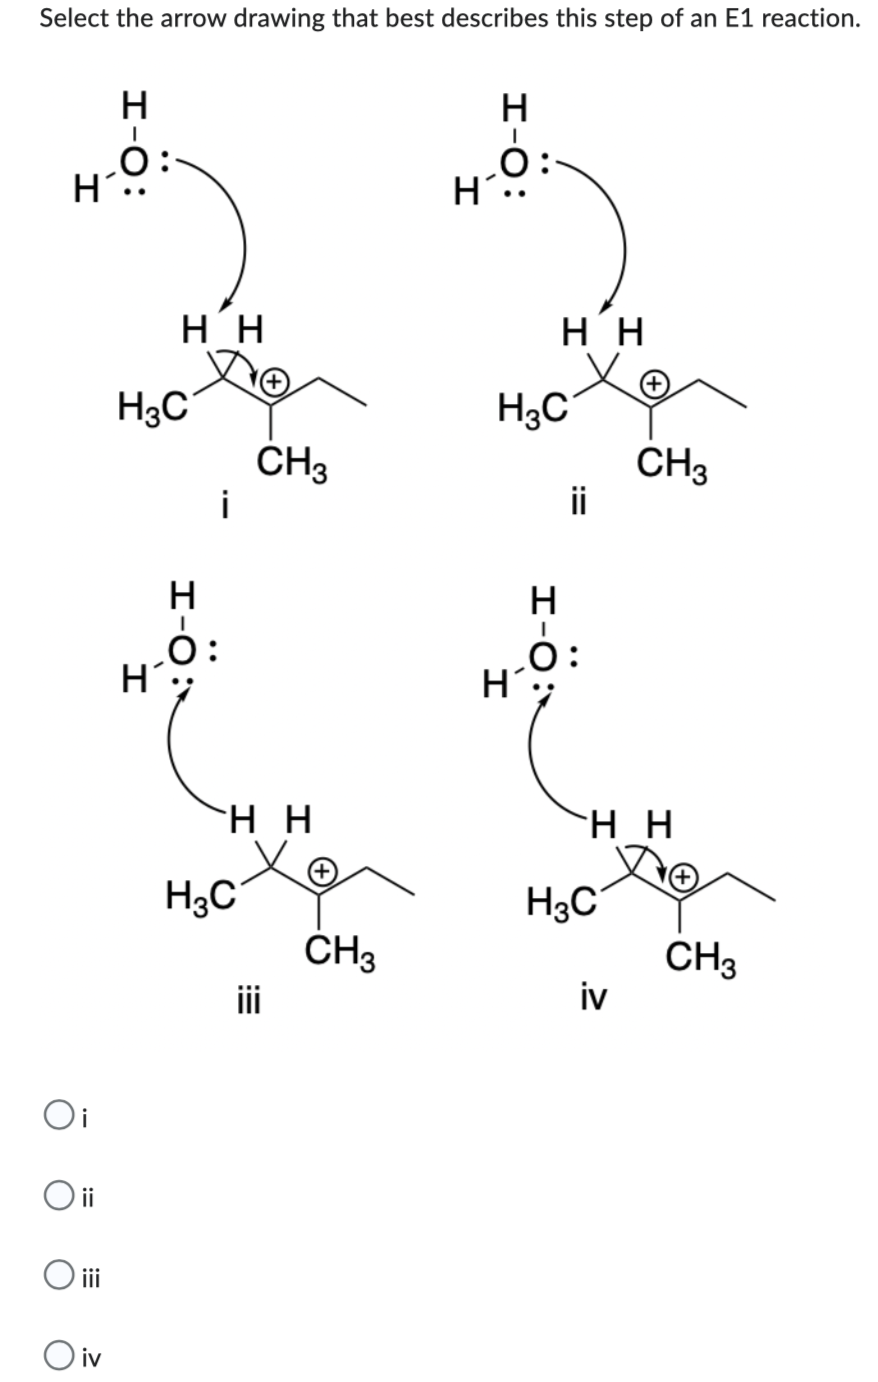 Select the arrow drawing that best describes this step of an E1 reaction.
H
I-0:
н.
Oi
O ii
O iii
O iv
нн
H3C
I
i
CH3
нн
H3C
CH3
I-0:
н.
I
H3C
I
H
нн
нн
H3C
CH3
iv
CH3